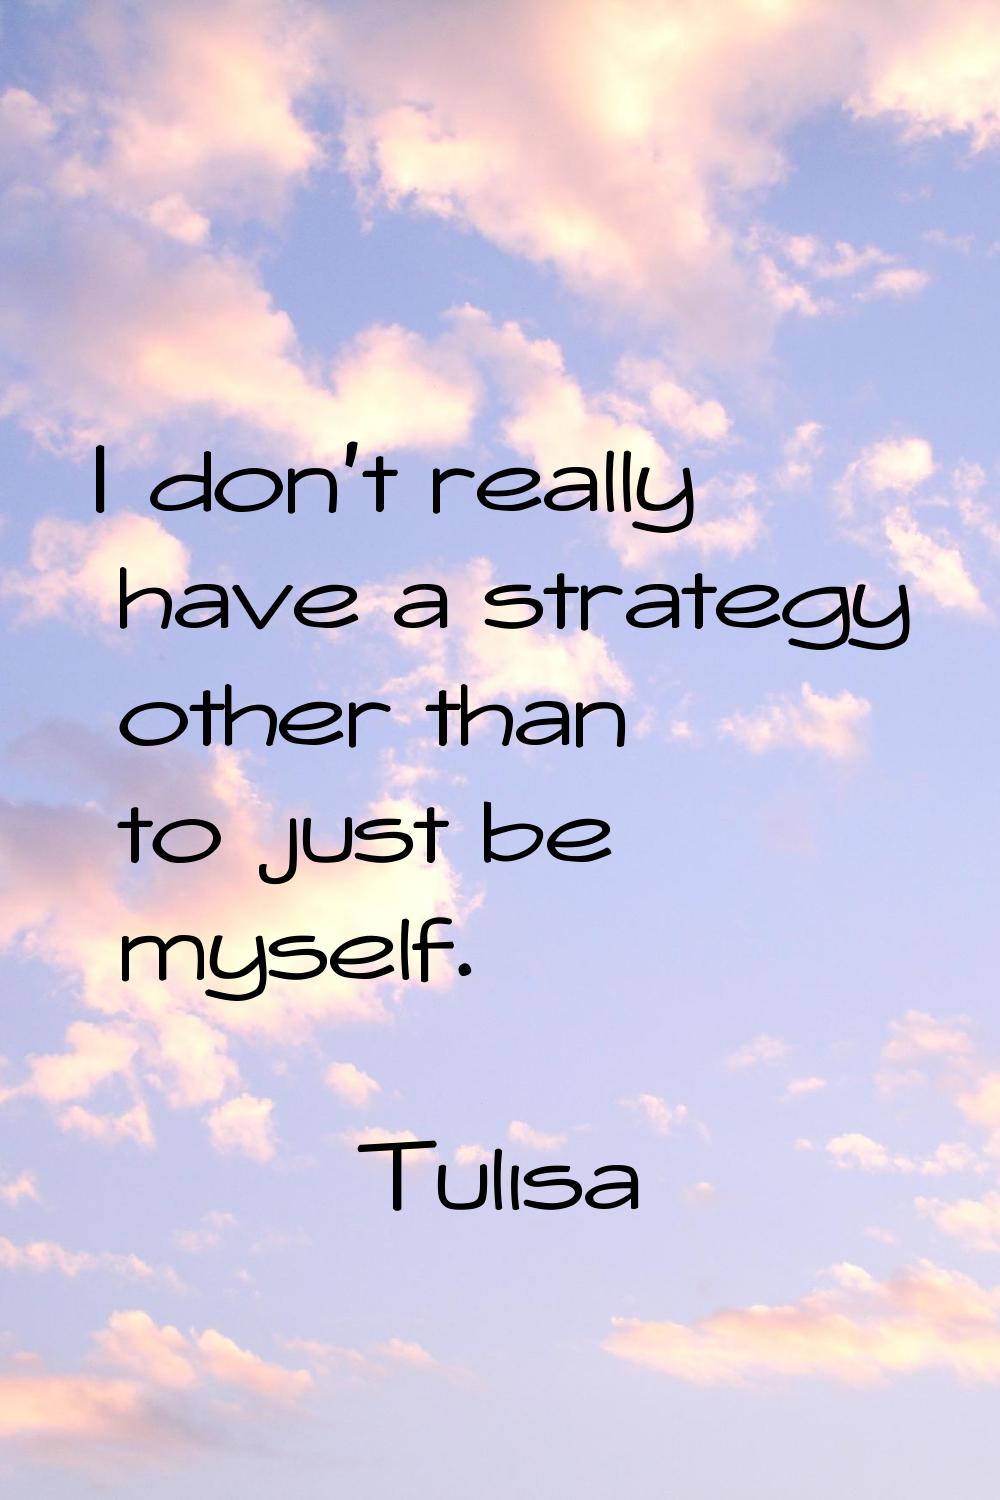 I don't really have a strategy other than to just be myself.